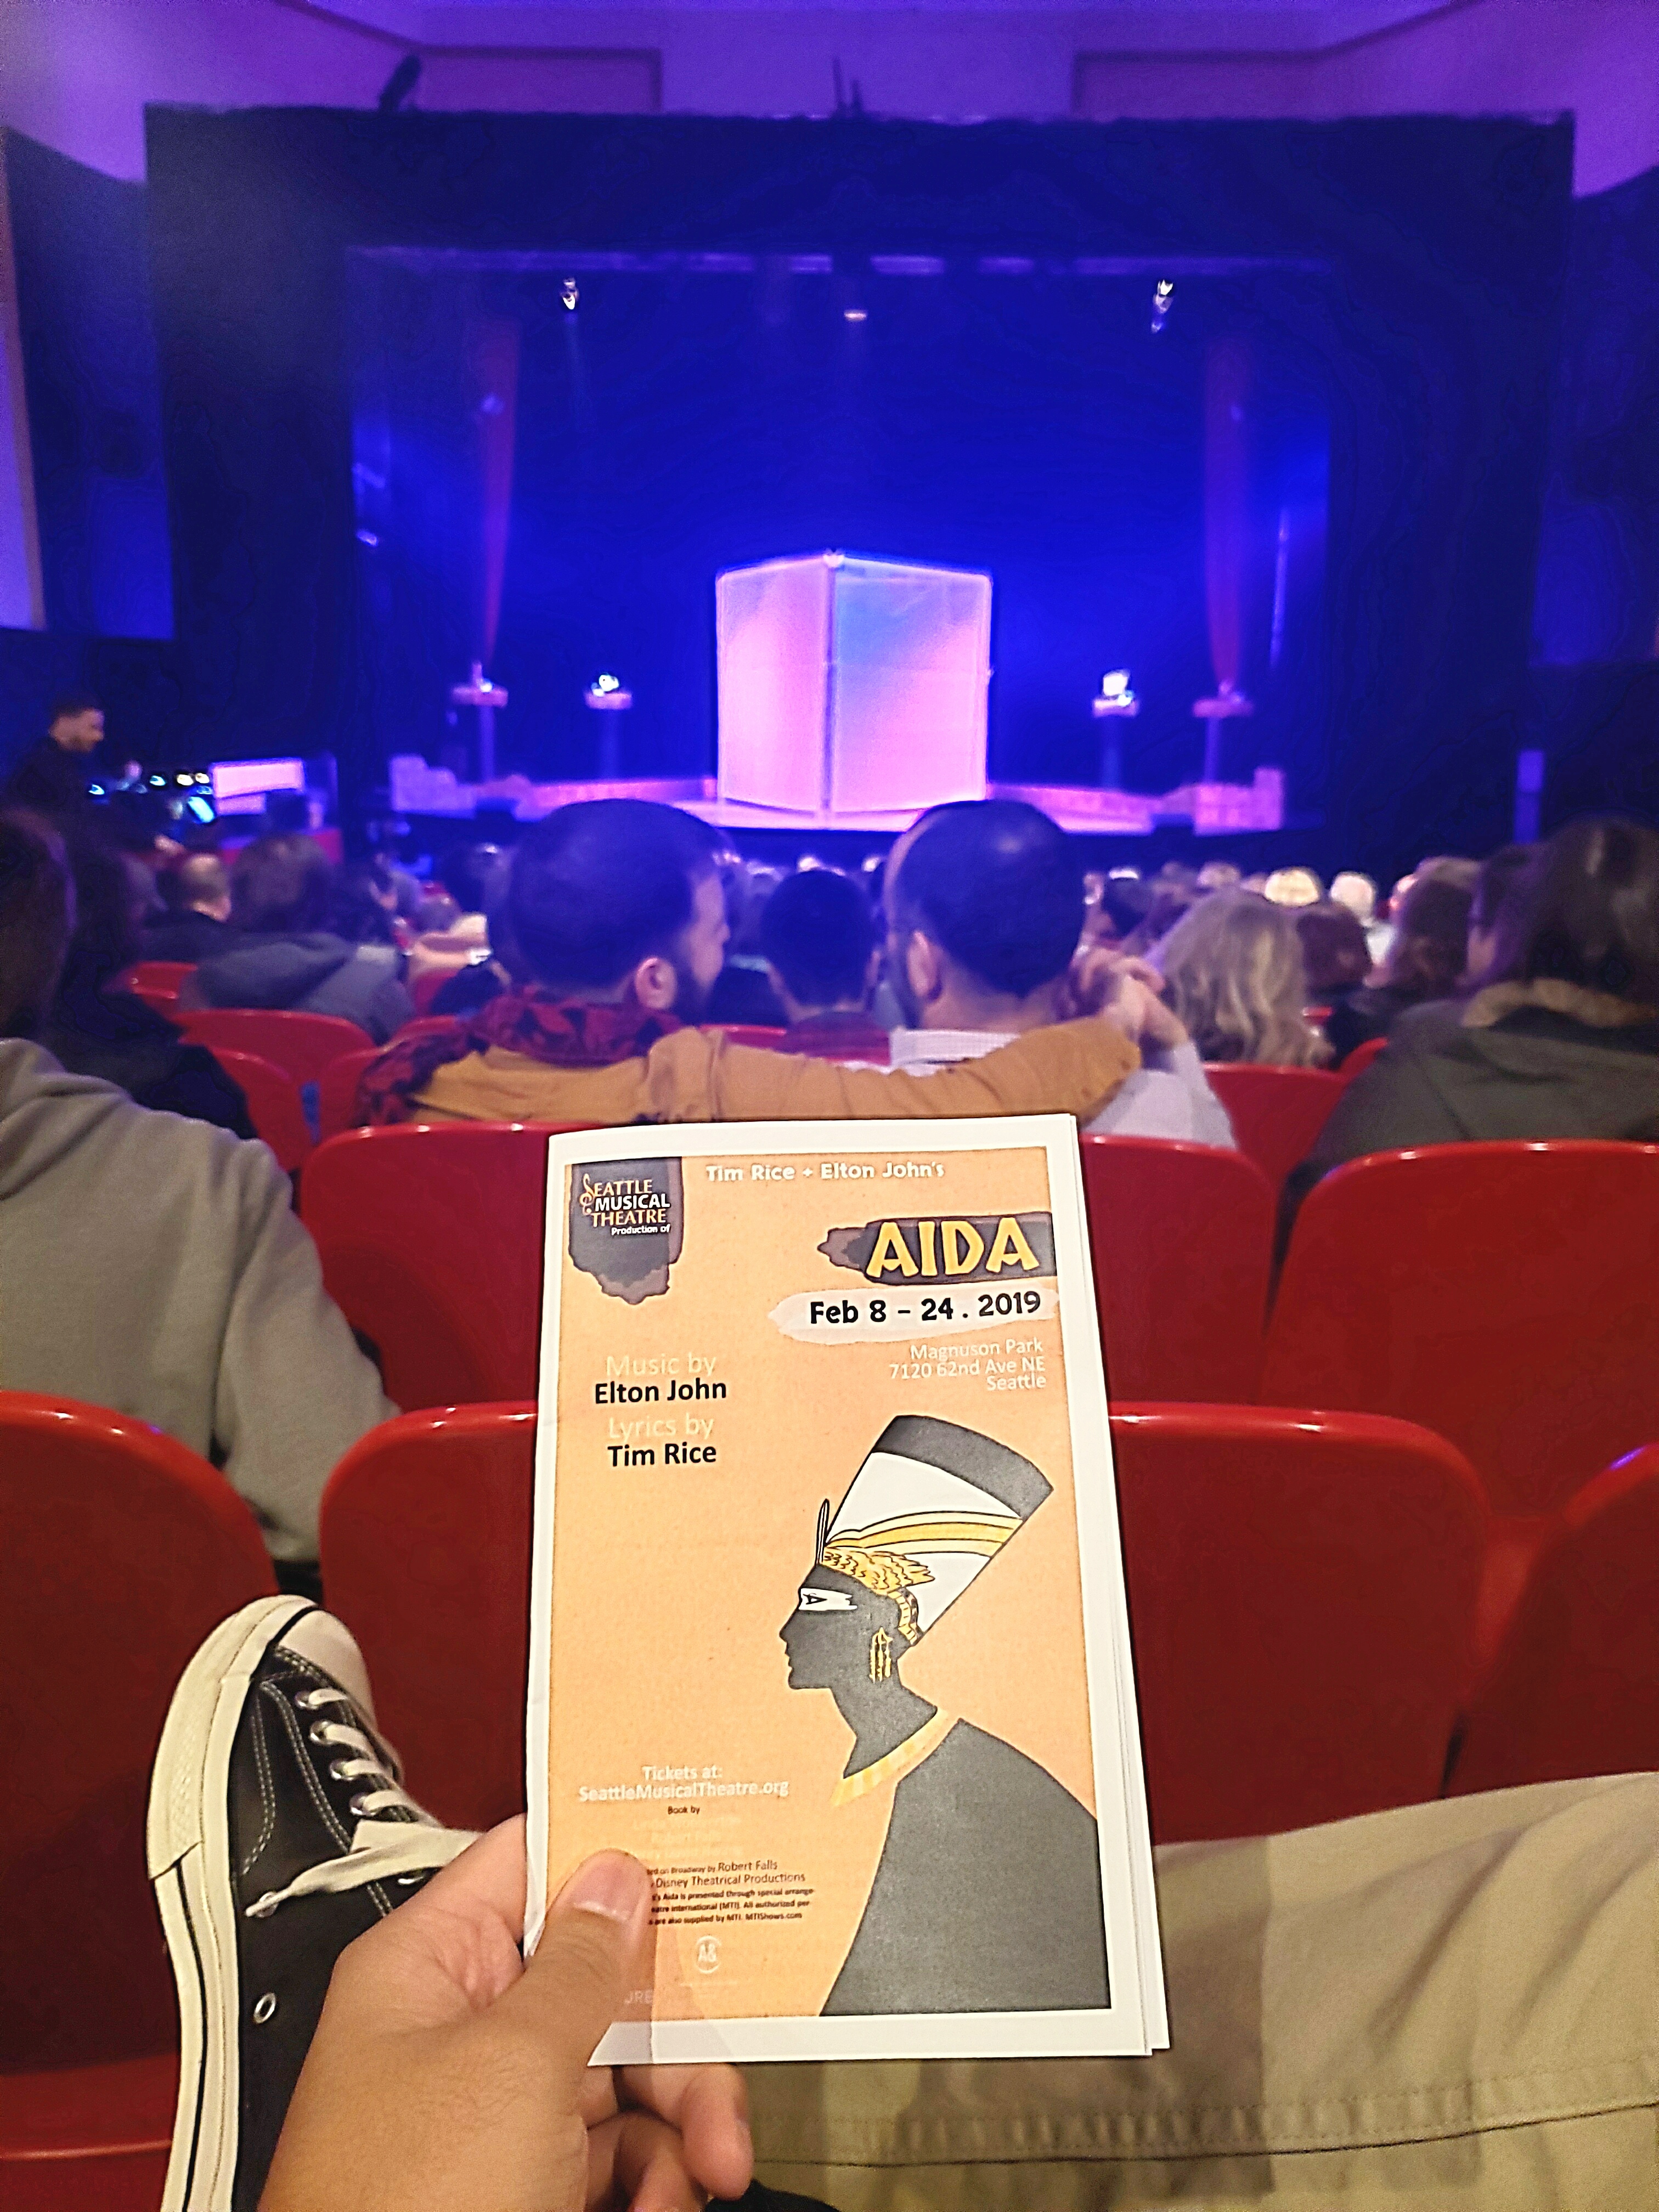 Elton John's Tony Awards & Grammy Awards-winning AIDA musical at Seattle Musical Theatre. Aida & Zoser's voices were #amazing! Radames was hot. Kinda jealous of the loving couple 2 rows up ?. #musical #forbiddenLove #cheaters